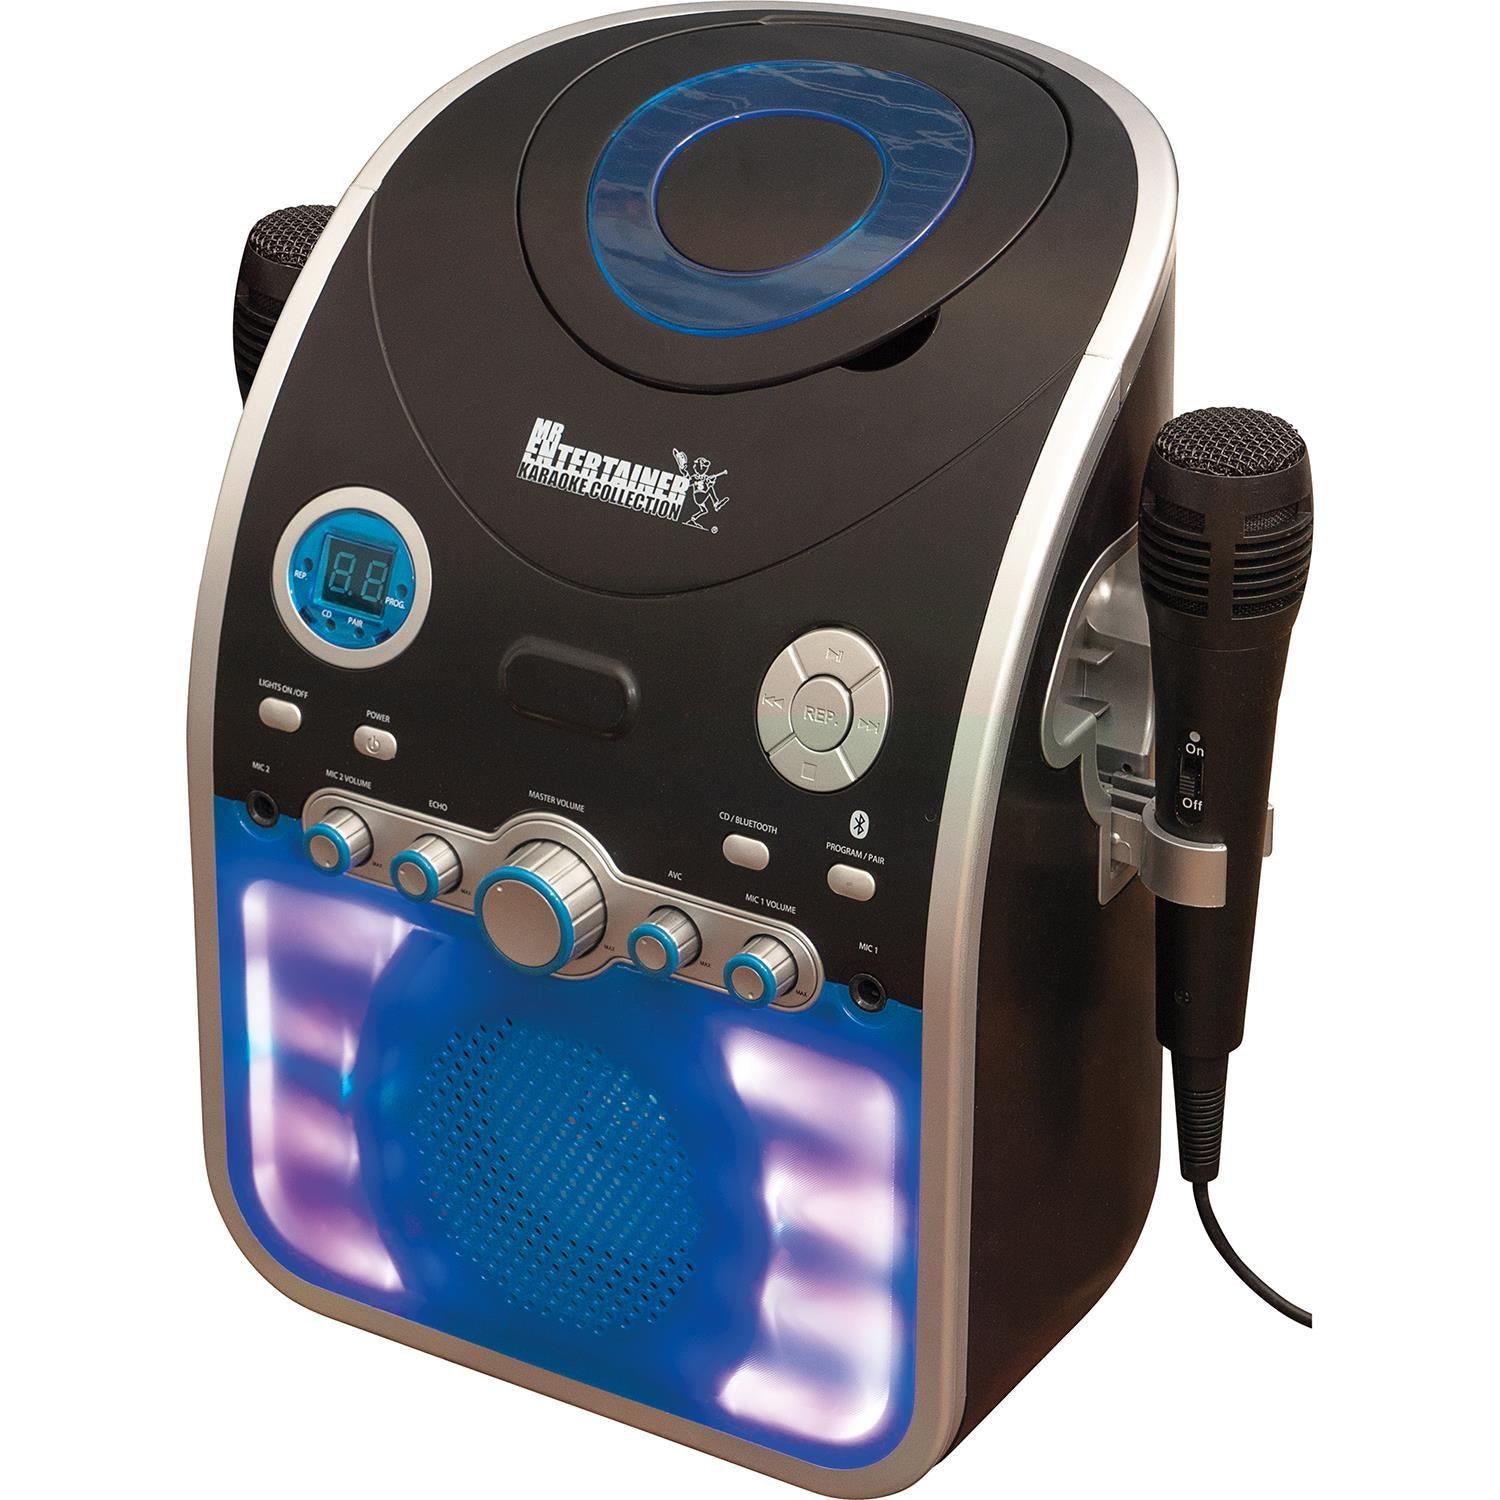 Mr Entertainer CDG Karaoke Machine With Bluetooth, CD, Lights - DY Pro Audio